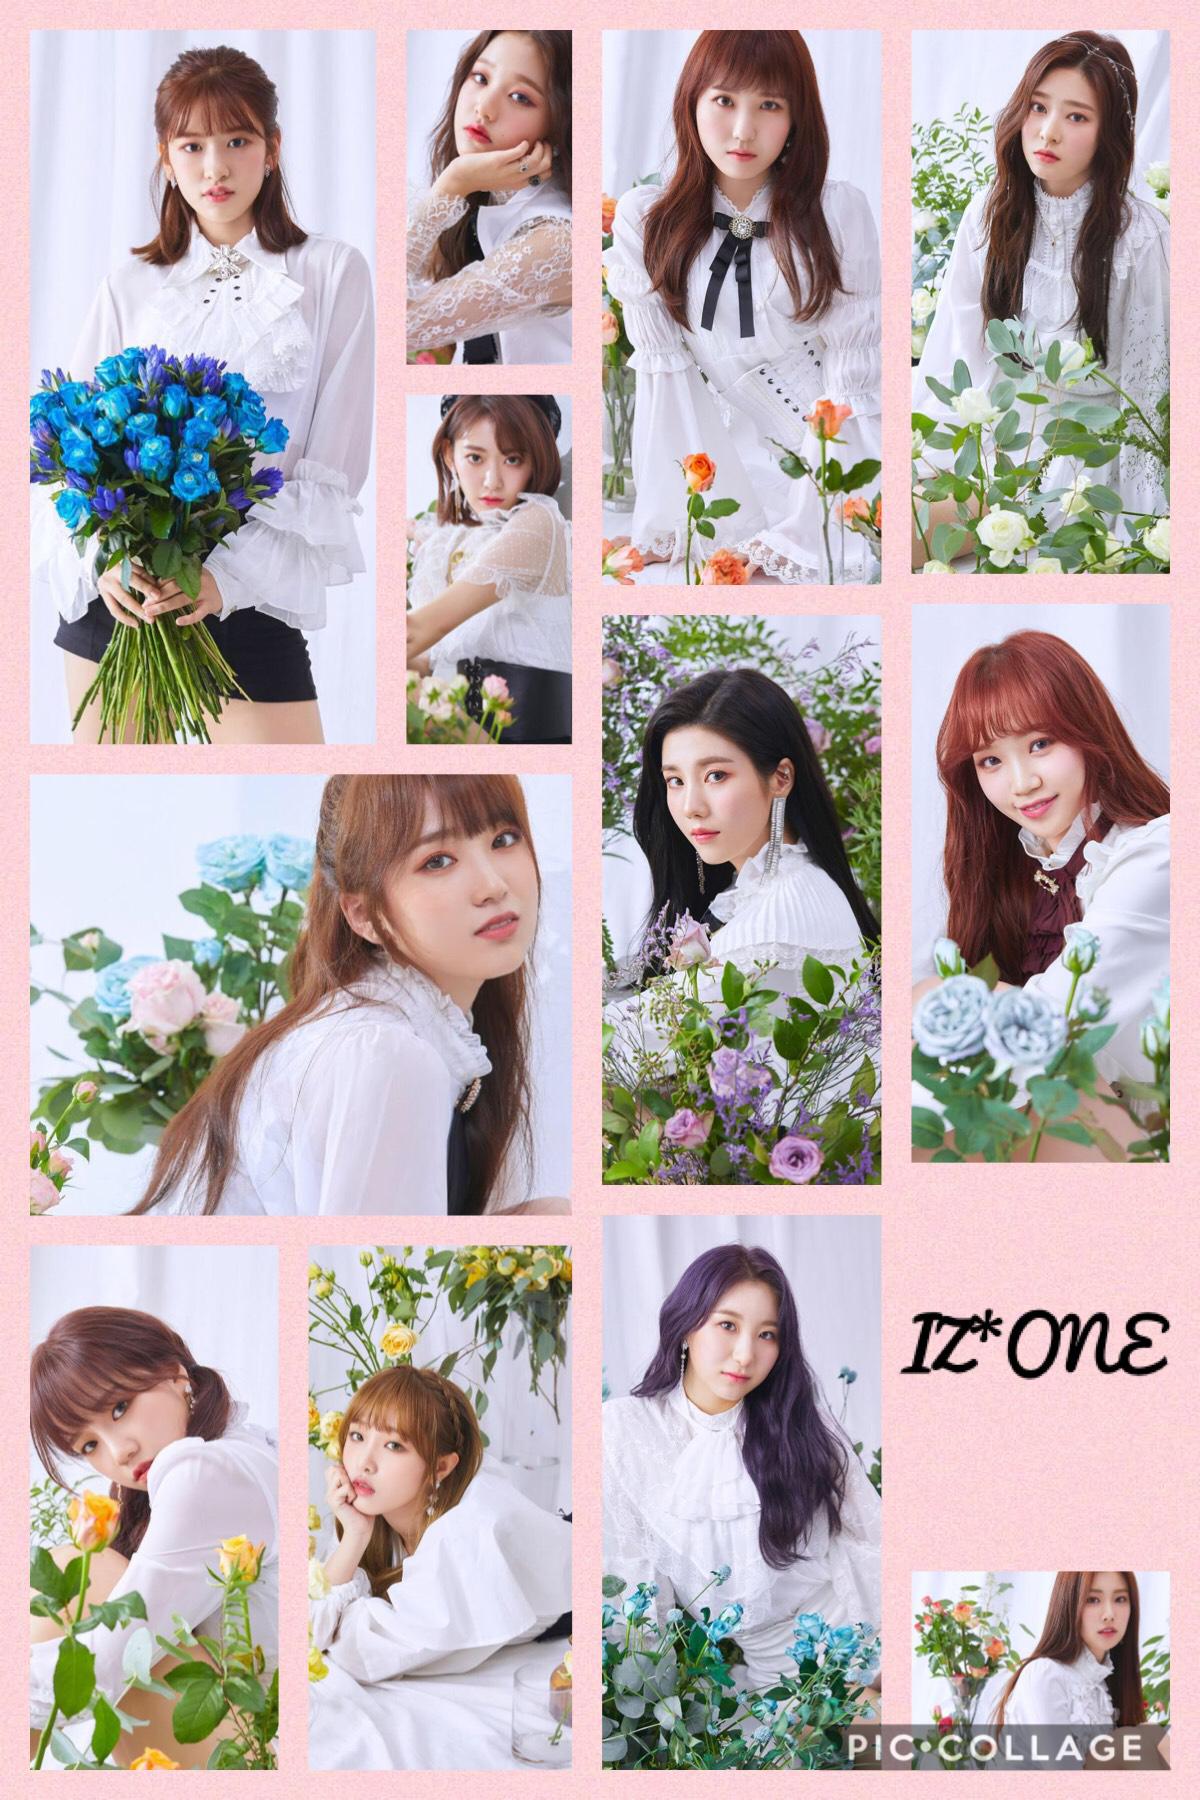 IZ*ONE (click)
❤️❤️❤️❤️❤️
IZ*ONE debut with the song La Vie En rose
❤️❤️❤️❤️❤️
If you don’t listen to IZ*ONE you need to do it,
They where in a survival show, Produce 48!
❤️❤️❤️❤️❤️

IZ*ONE Fighting! 
